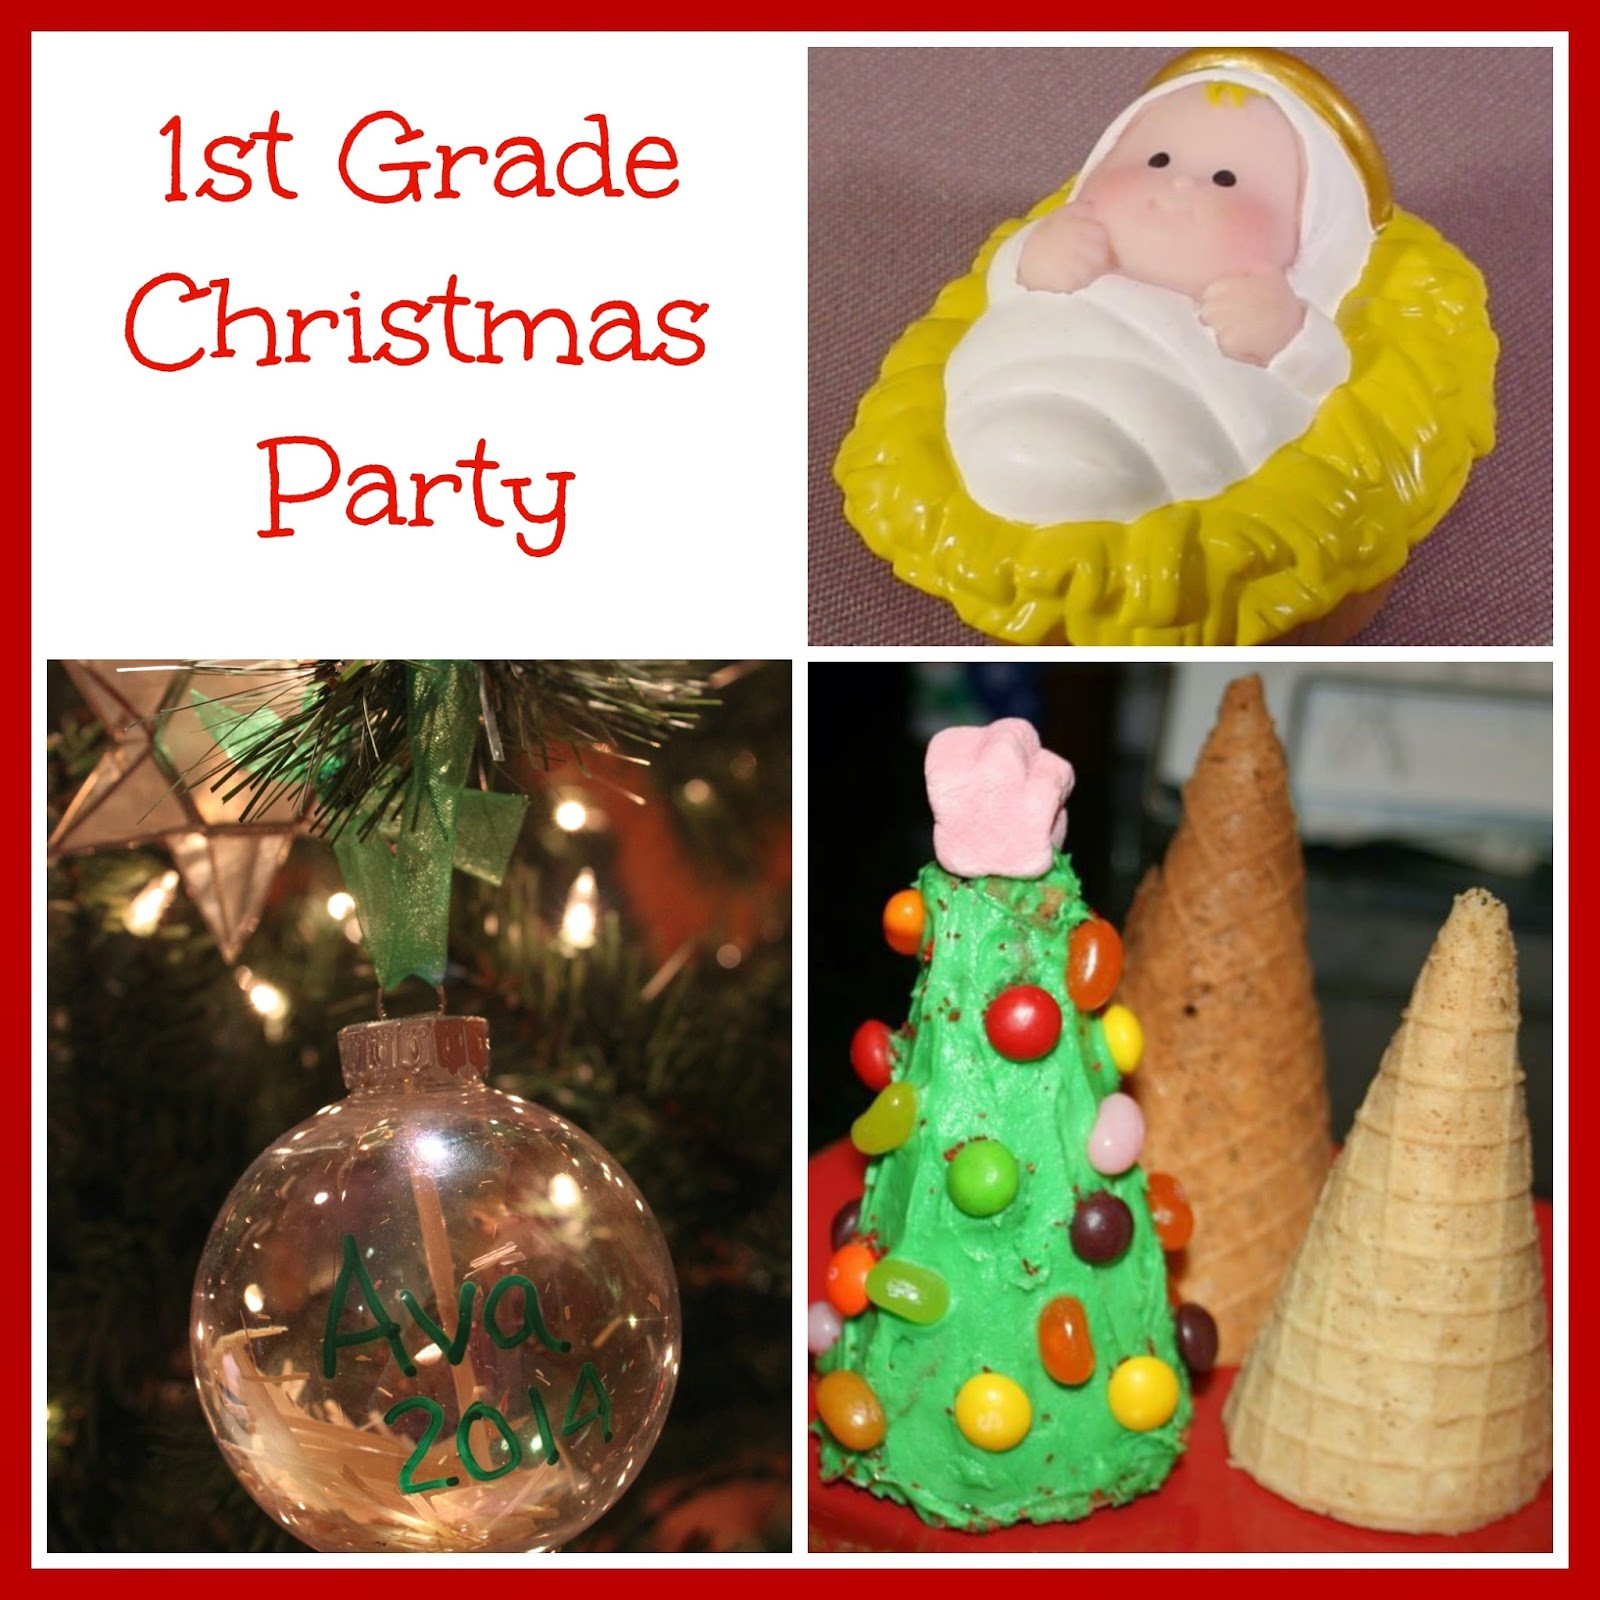 First Grade Christmas Party Ideas
 Keeping up with the Kiddos 1st Grade Christmas Party